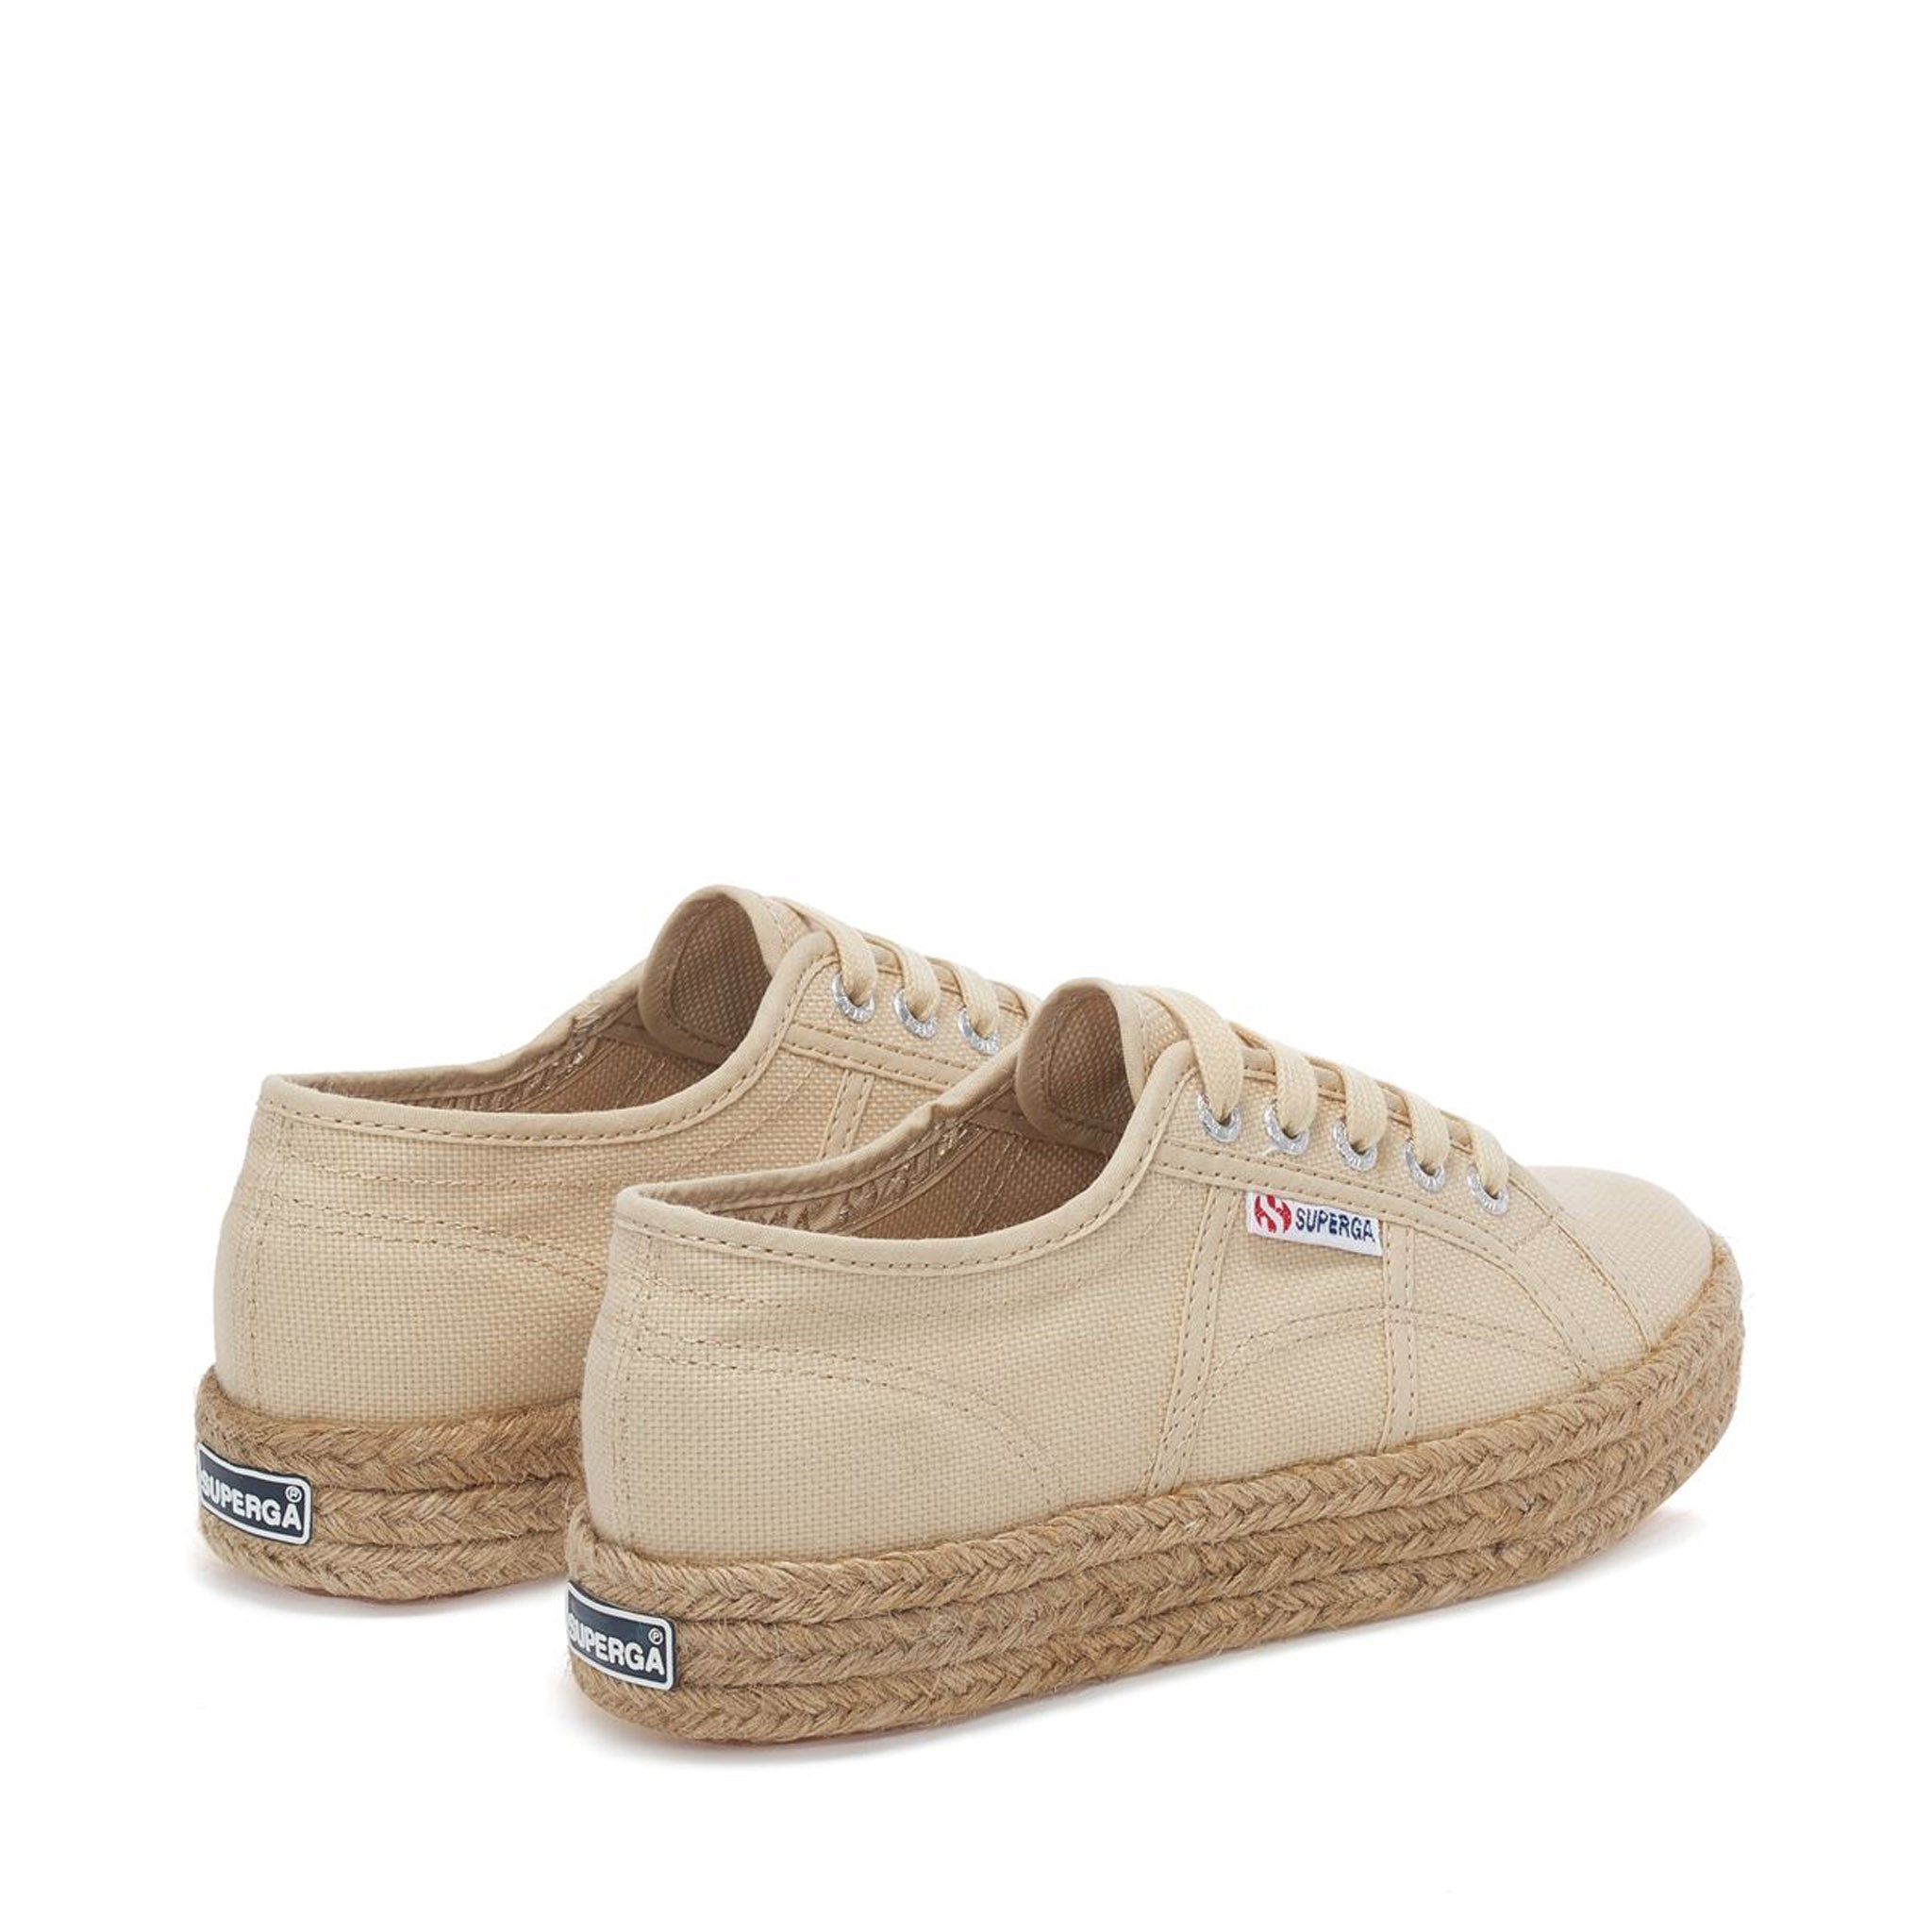 Superga 2730 Rope Sneakers - Canvas. Back view.